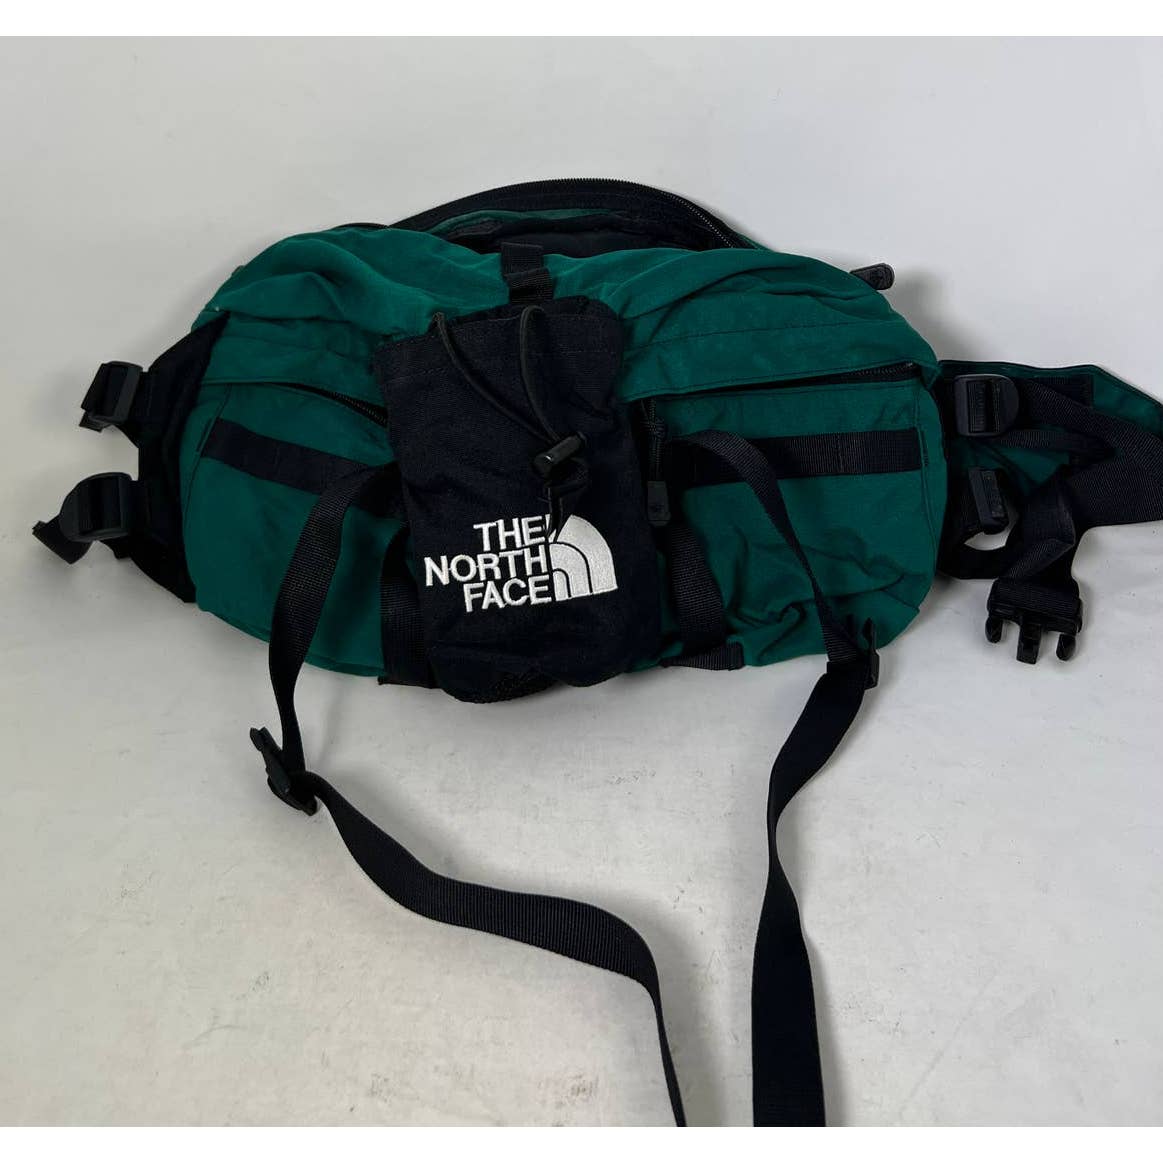 The North Face Green Vintage Waist Pack Bag